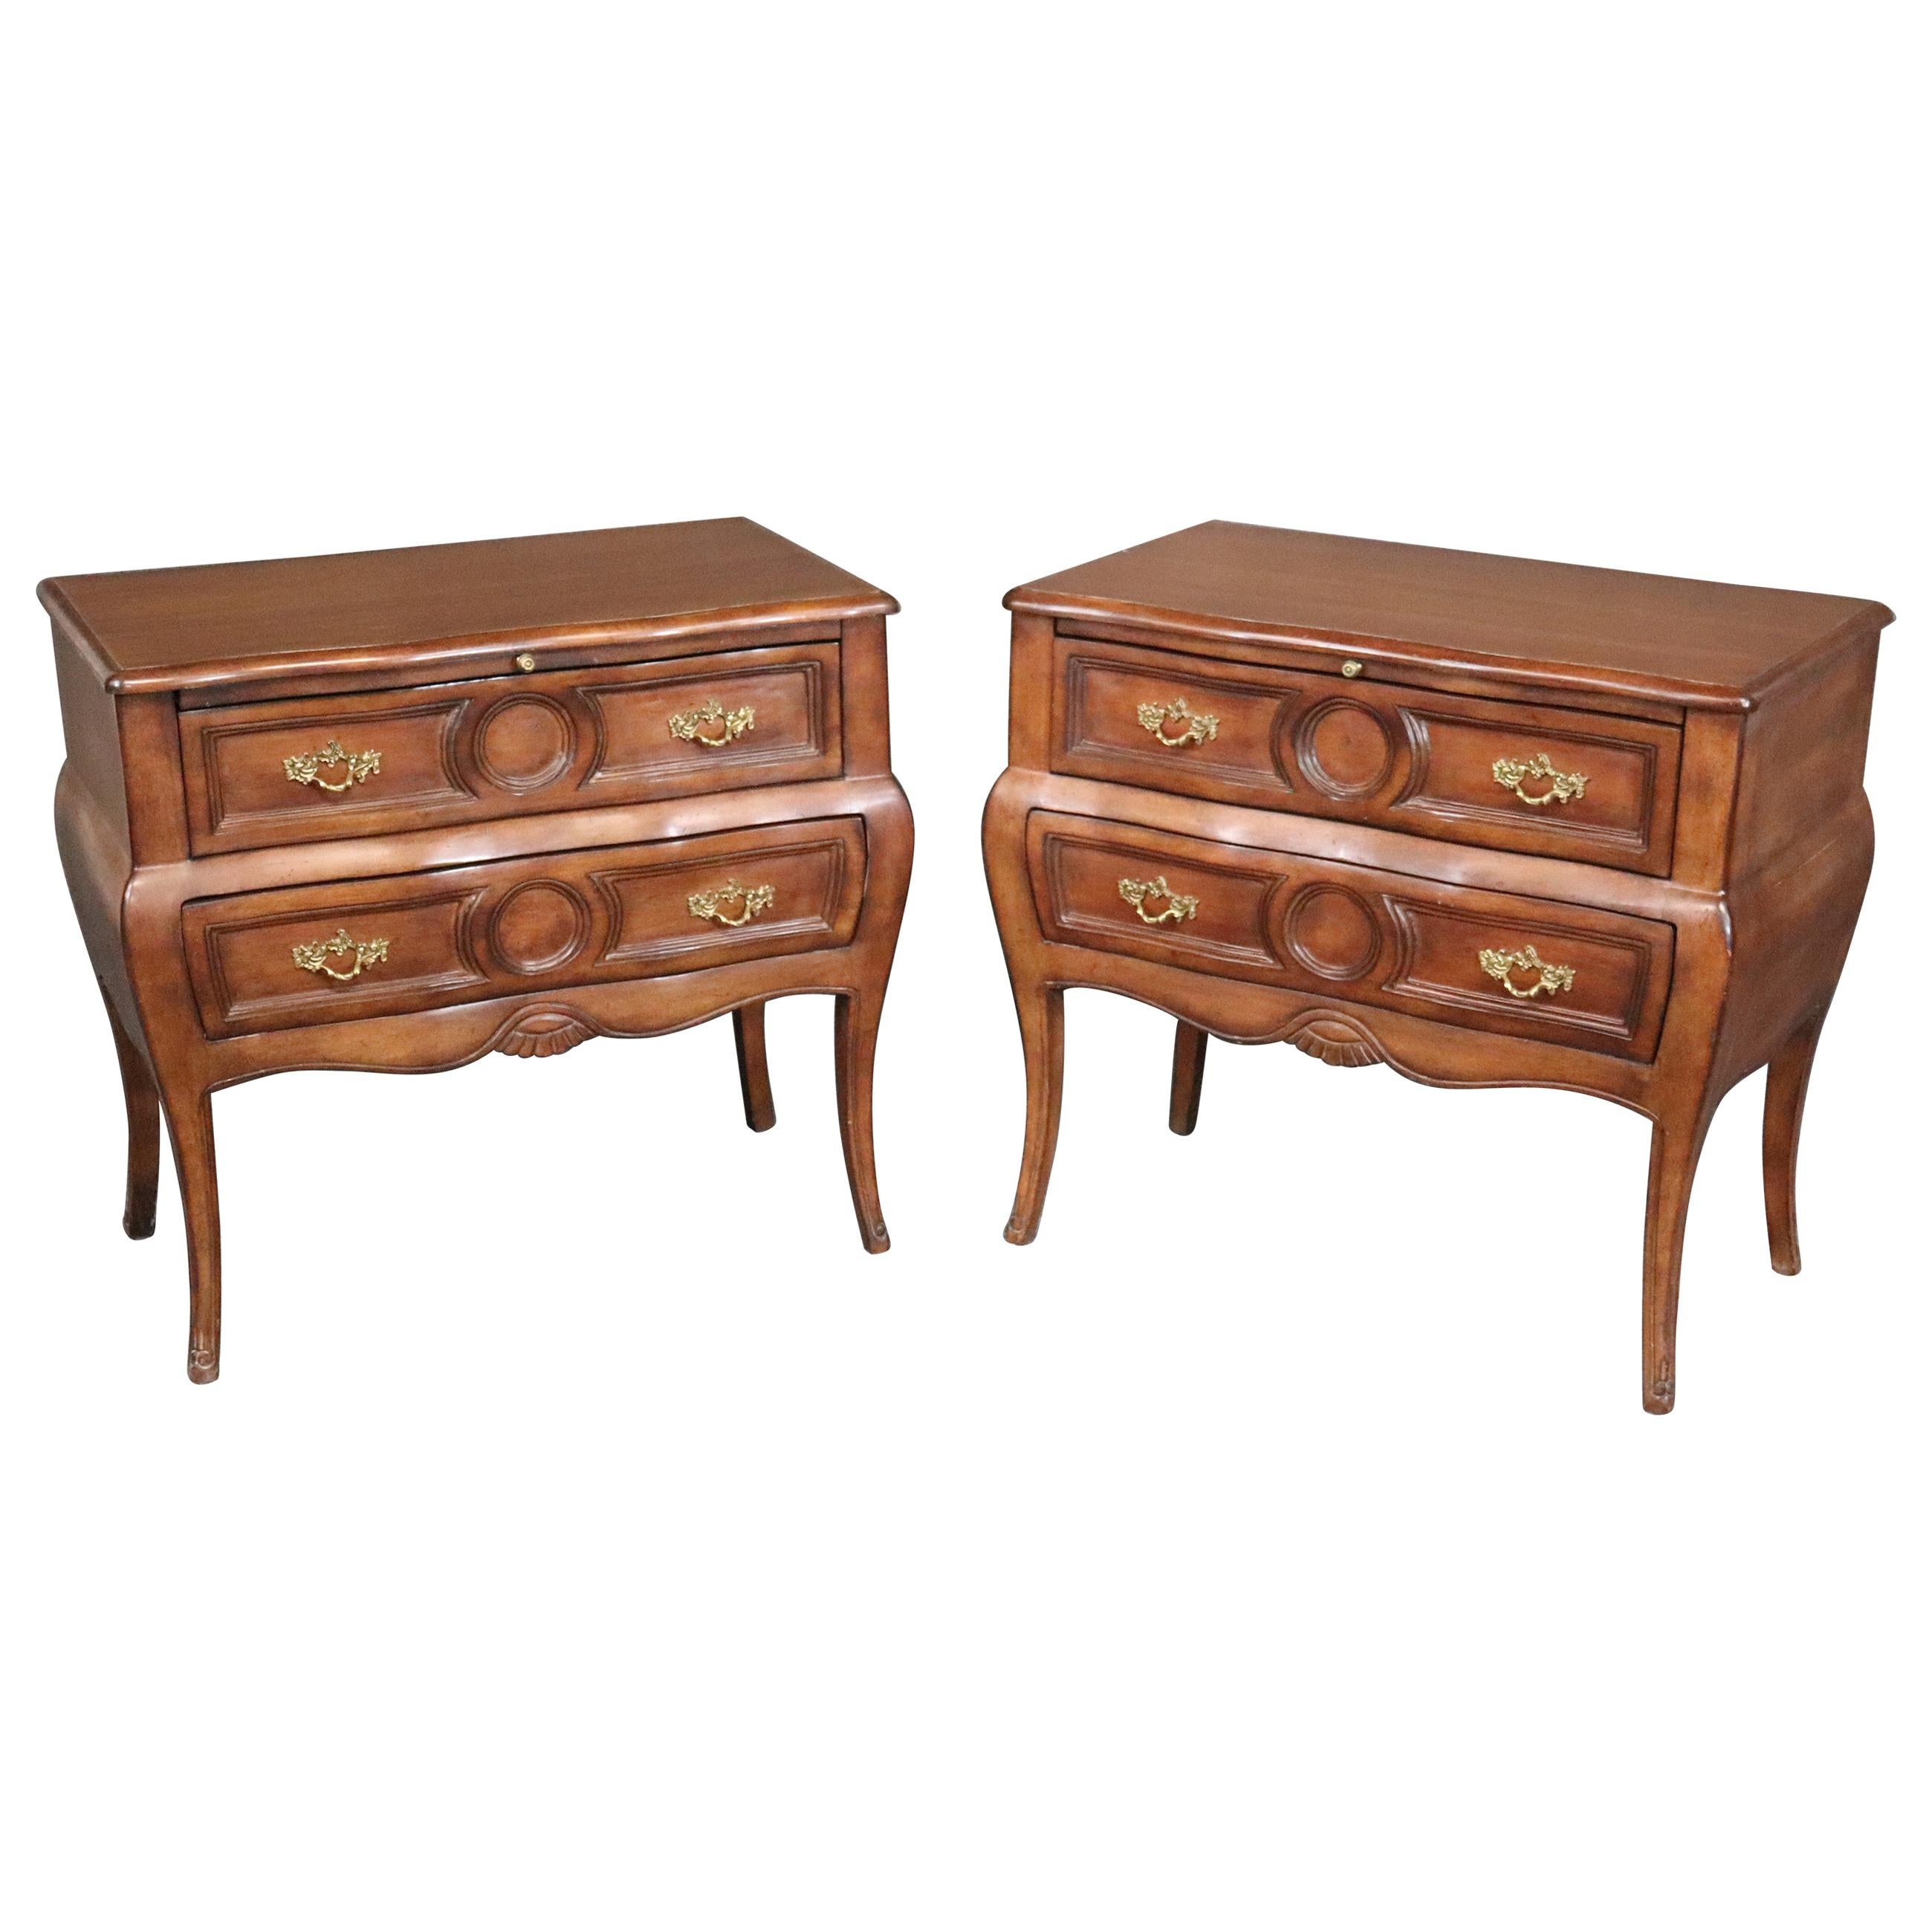 Italian Bombe Walnut Nightstands Commodes with Slide Out Trays circa 1950s, Pair